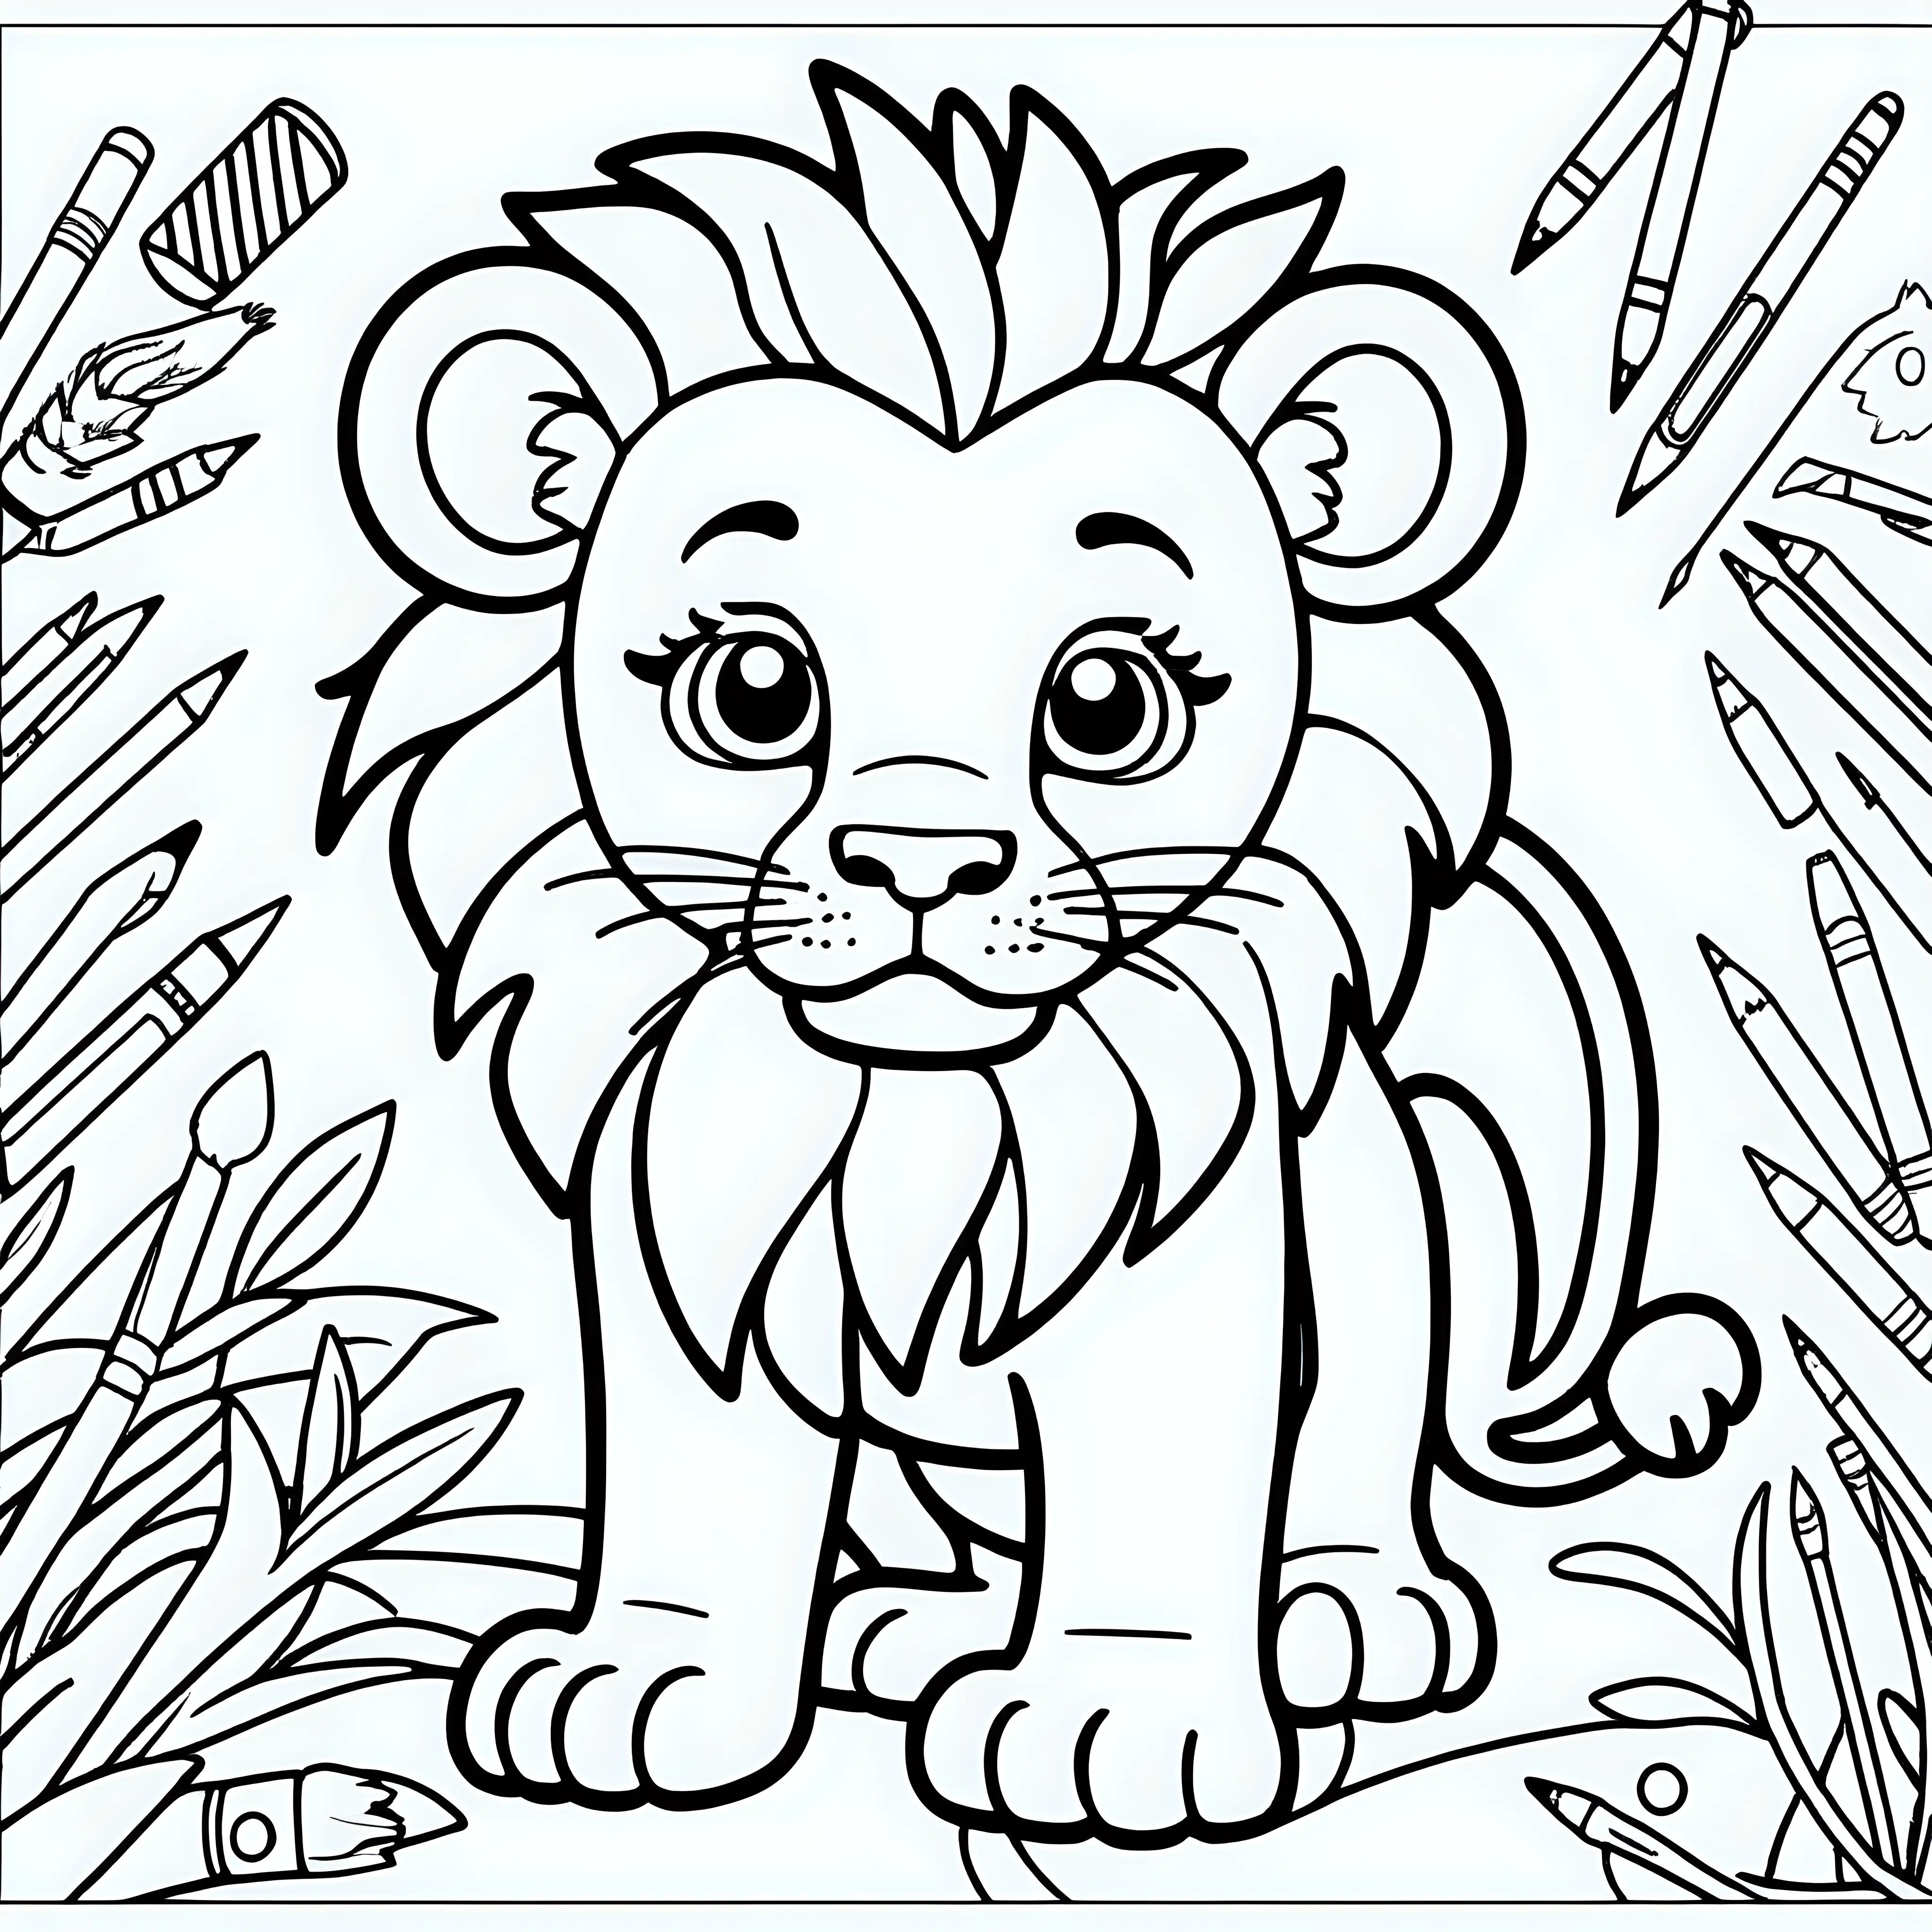 Cute Cartoon Lion Coloring Page for Kids